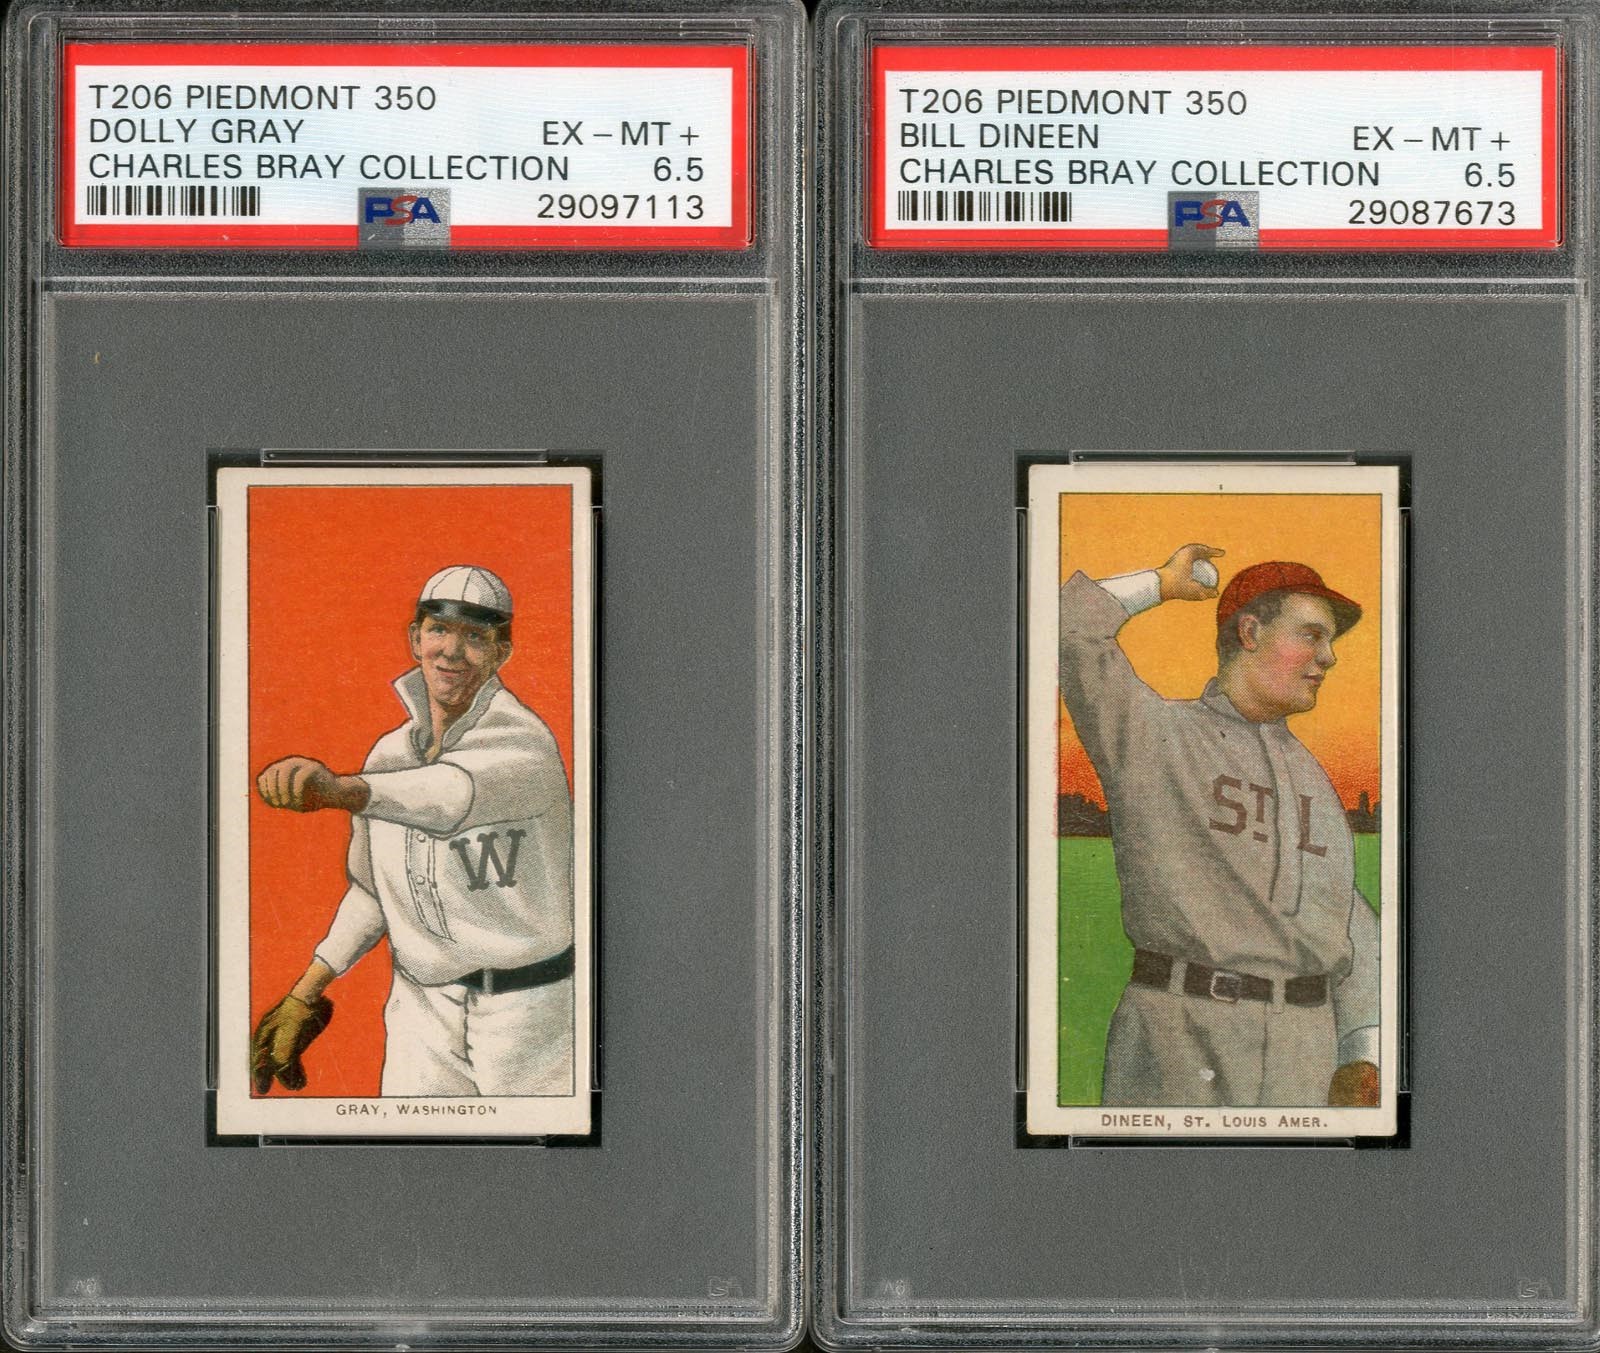 - Two T206 Piedmont 350 PSA Graded 6.5's From The Charles Bray Collection